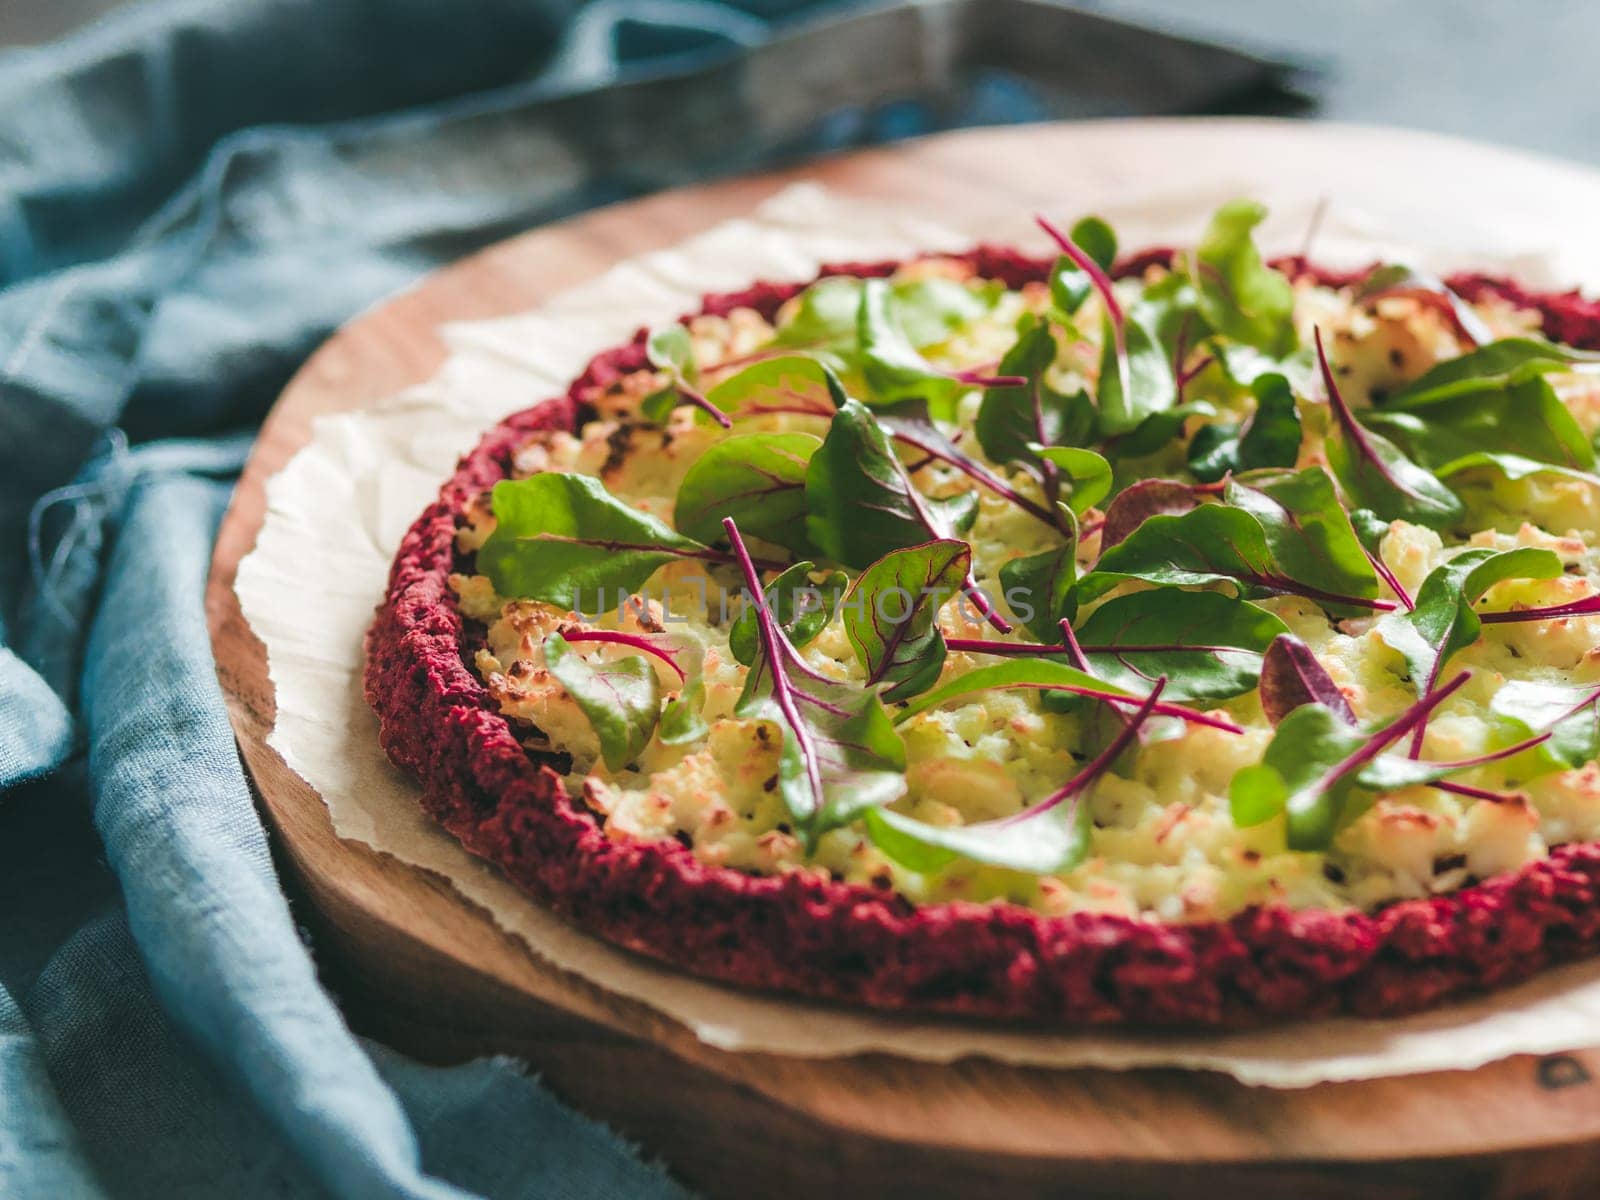 beetroot pizza crust with fresh mangold leaves by fascinadora